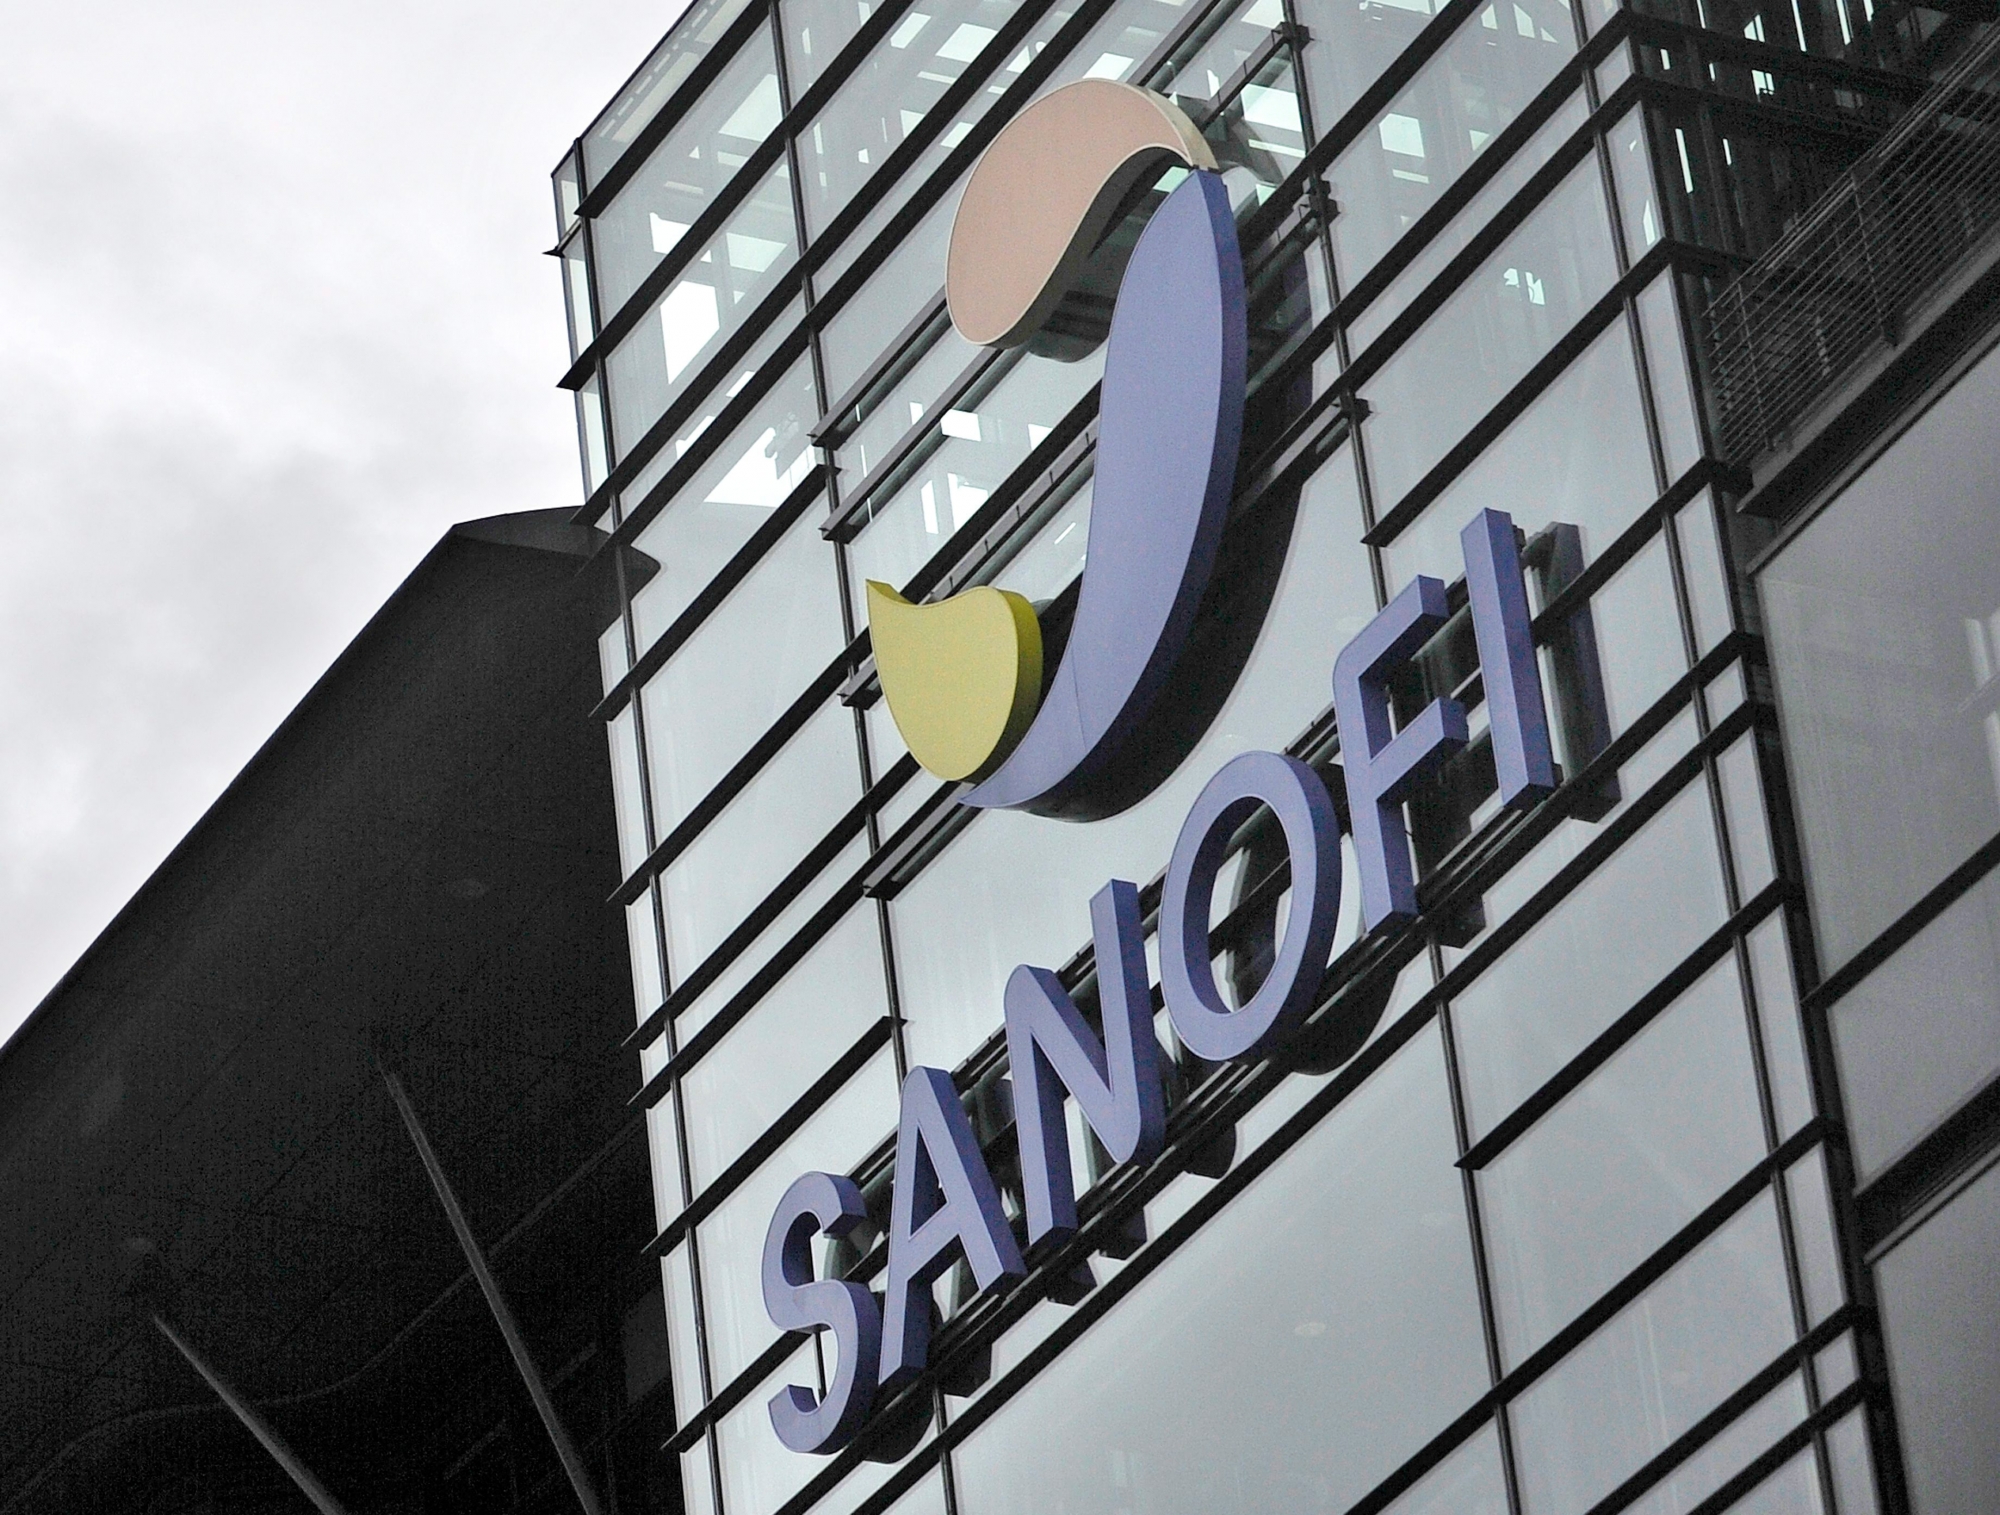 epa05139690 A photo dated 25 September 2012 showing a general view of the drug manufacturer Sanofi's office in Paris, France. Sanofi, France's largest drugmaker, said 02 February 2016 that it has launched a research project to develop a vaccine to combat the Zika virus. There is currently no vaccine against the Zika virus or specific treatment for the infection it causes. Zika is a mosquito-borne virus similar to dengue, against which Sanofi Pasteur - the vaccine division of French pharmaceutical company Sanofi - recently marketed the first vaccine. EPA/YOAN VALAT FRANKREICH SANOFI